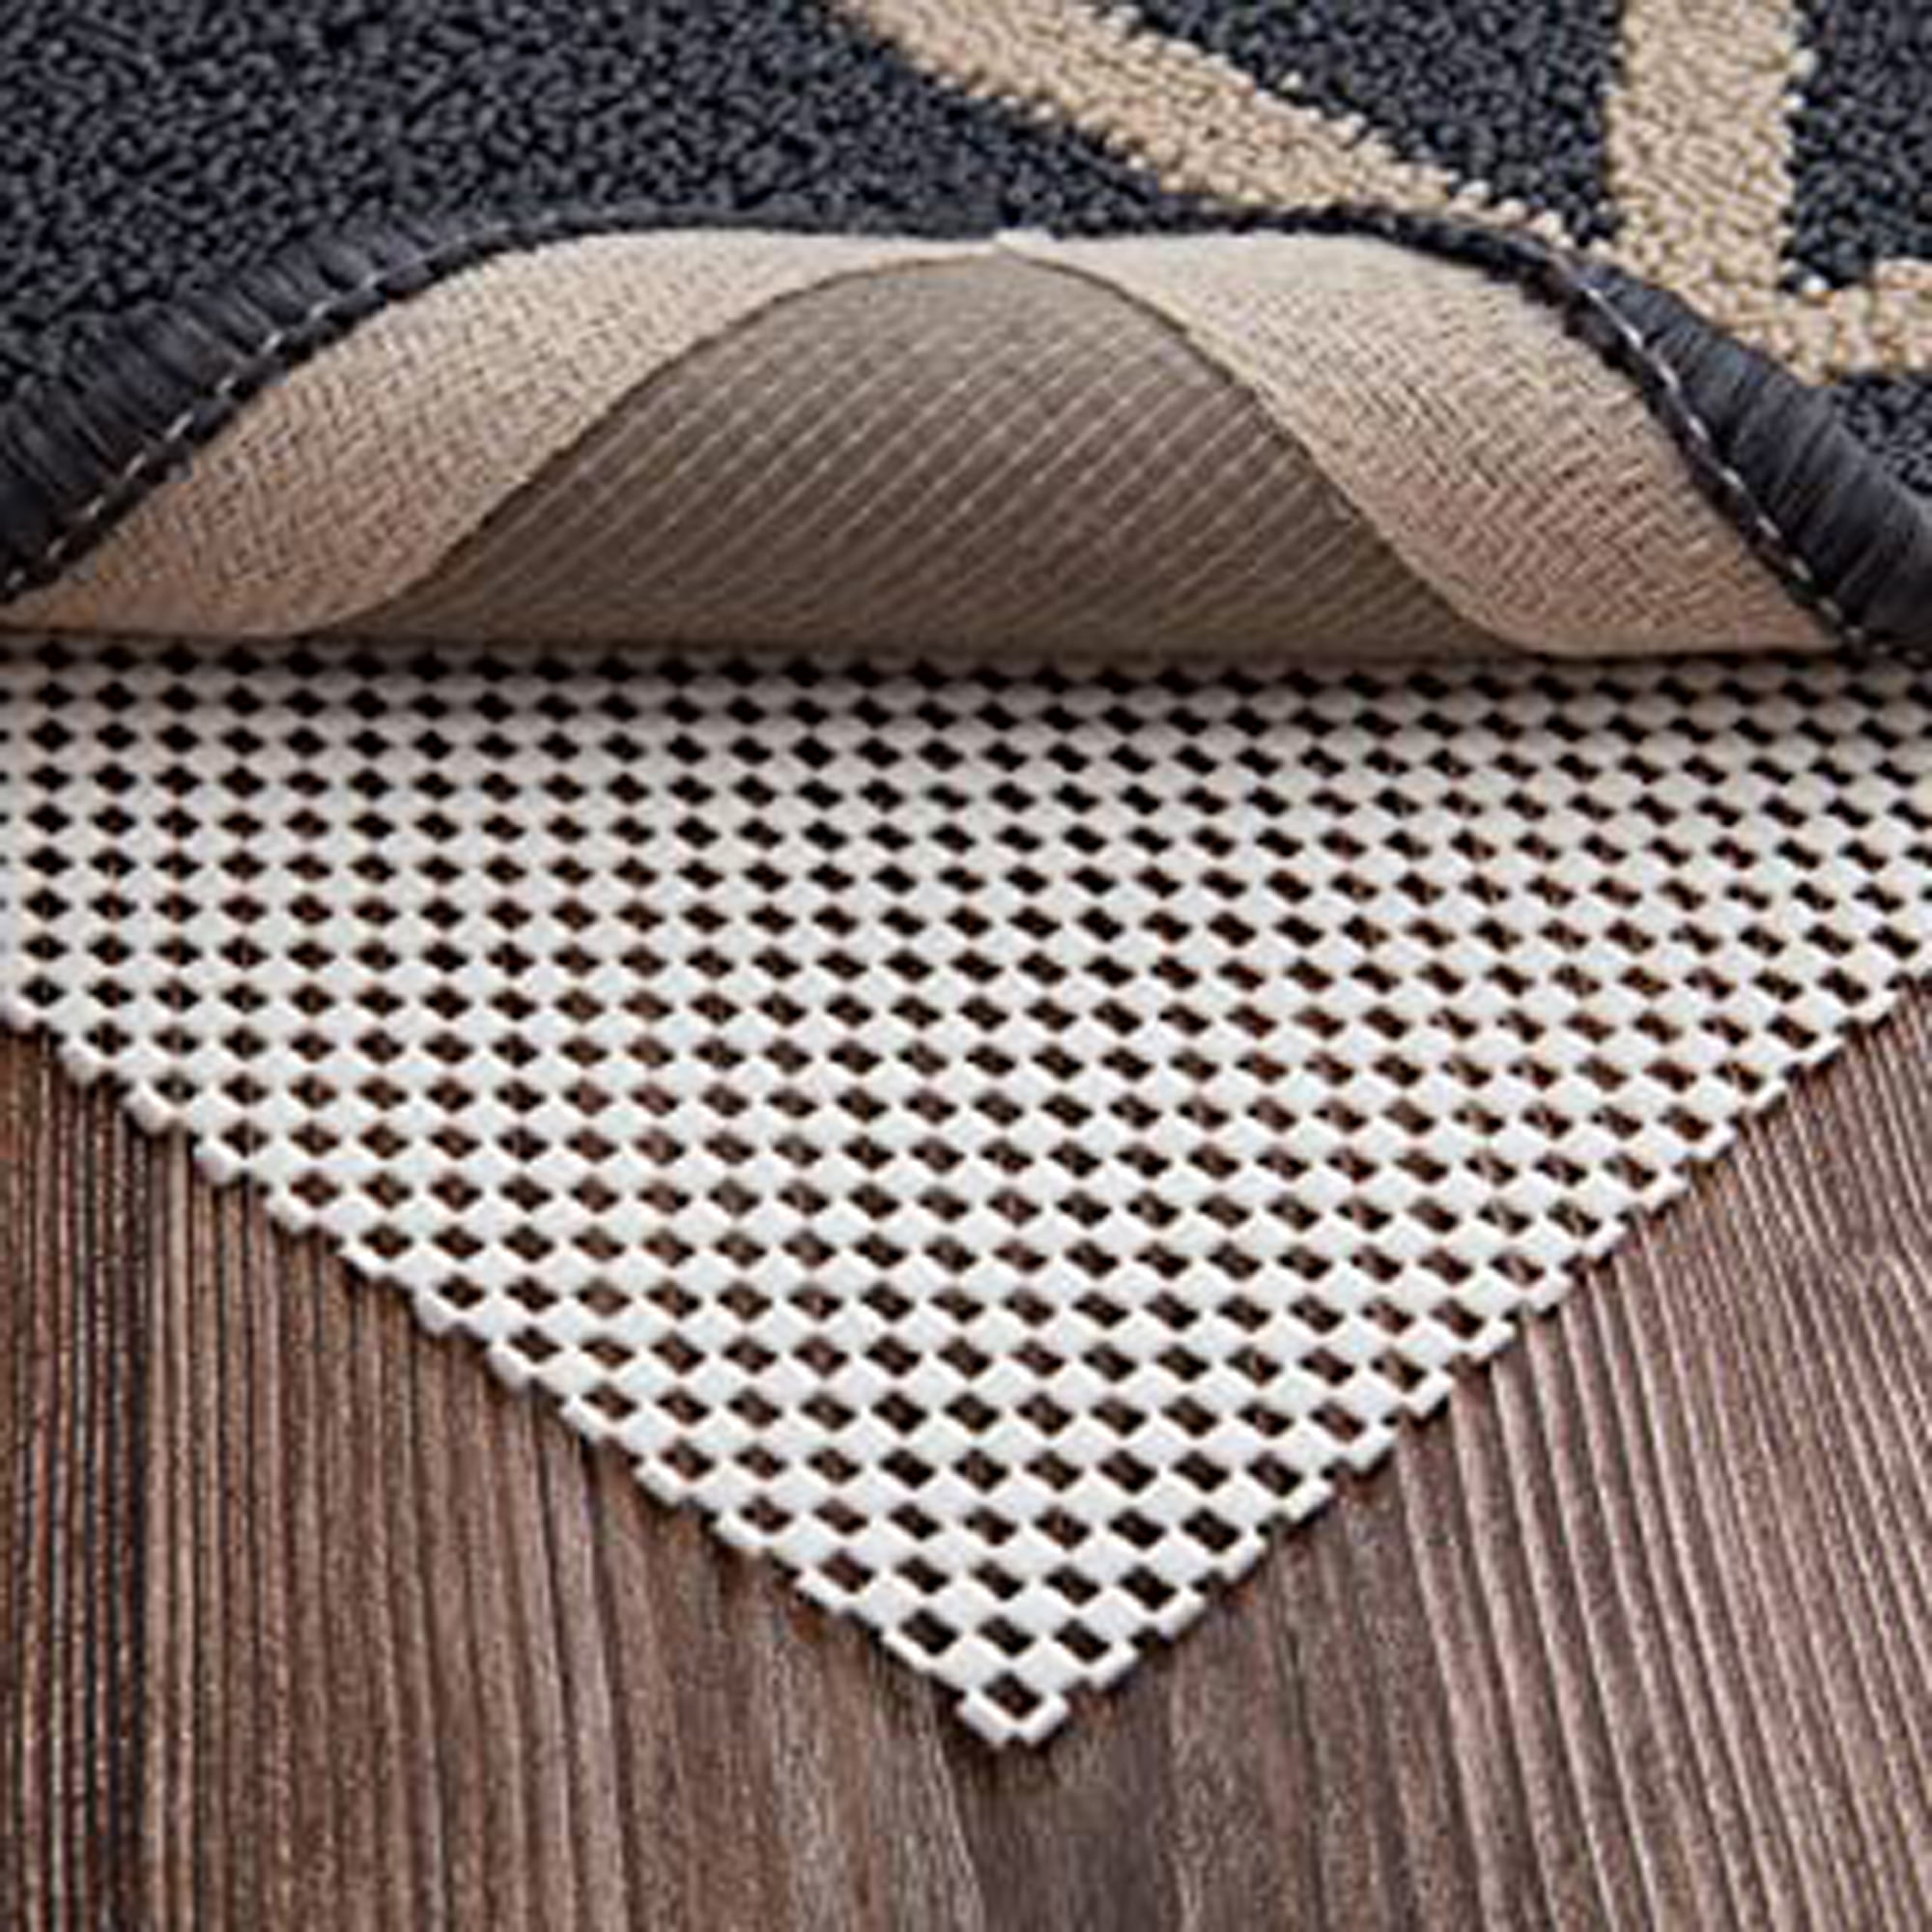 Premium Grip Non-Slip Area Rug Pad Gripper For Any Surface Floor Protect Hot US 